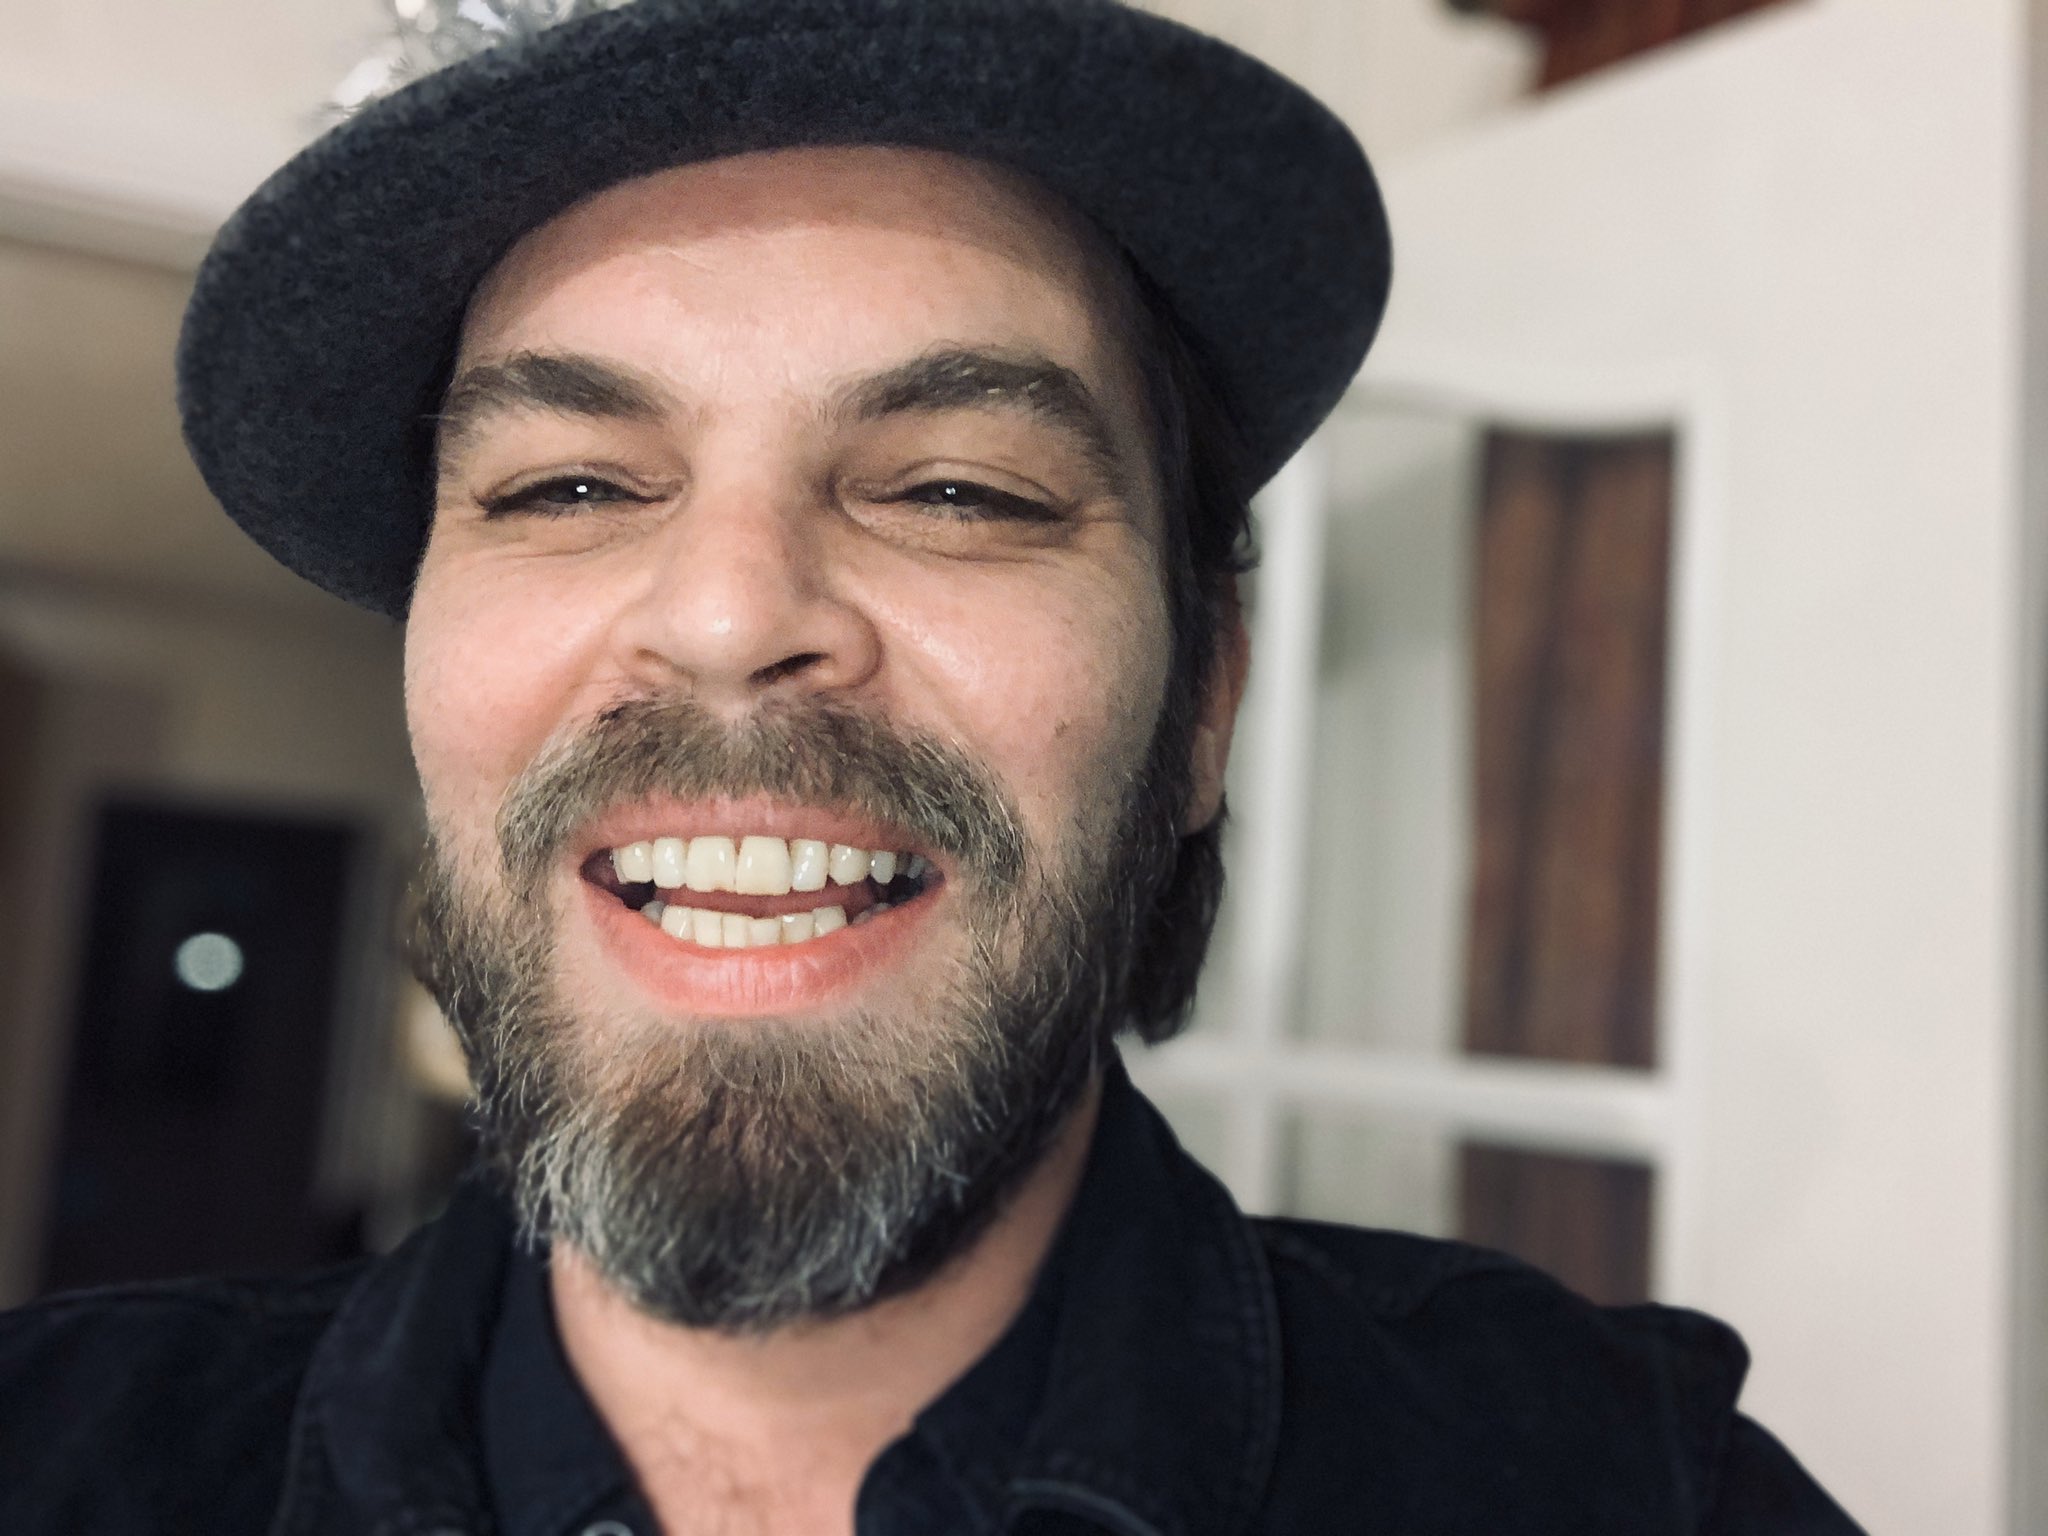 Gaz Coombes on Twitter: "...when you mean to take a family pic &amp; it's in selfie mode... Merry Christmas everyone! See you in 2020 💋 🤗 https://t.co/XcclU6M73n" / Twitter